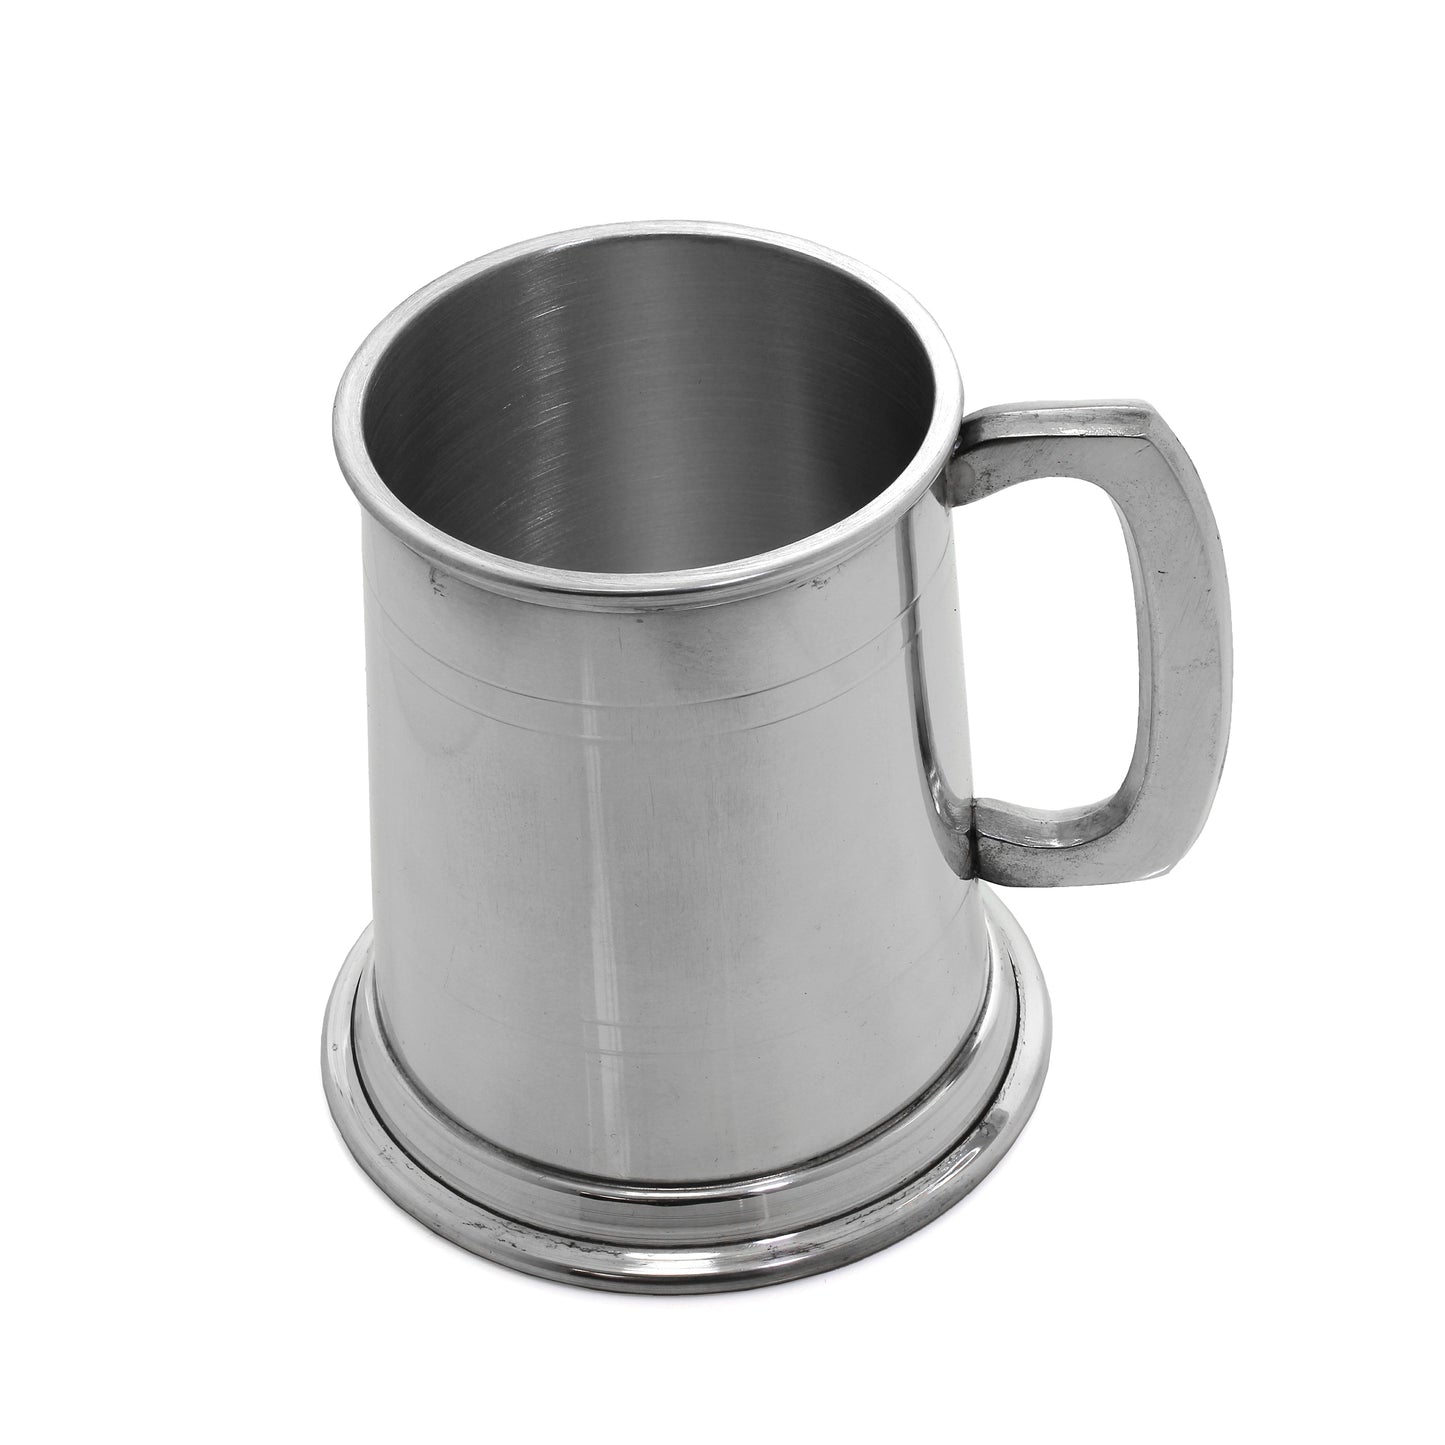 Commodore 1/2 Pint Engravable Pewter Tankard